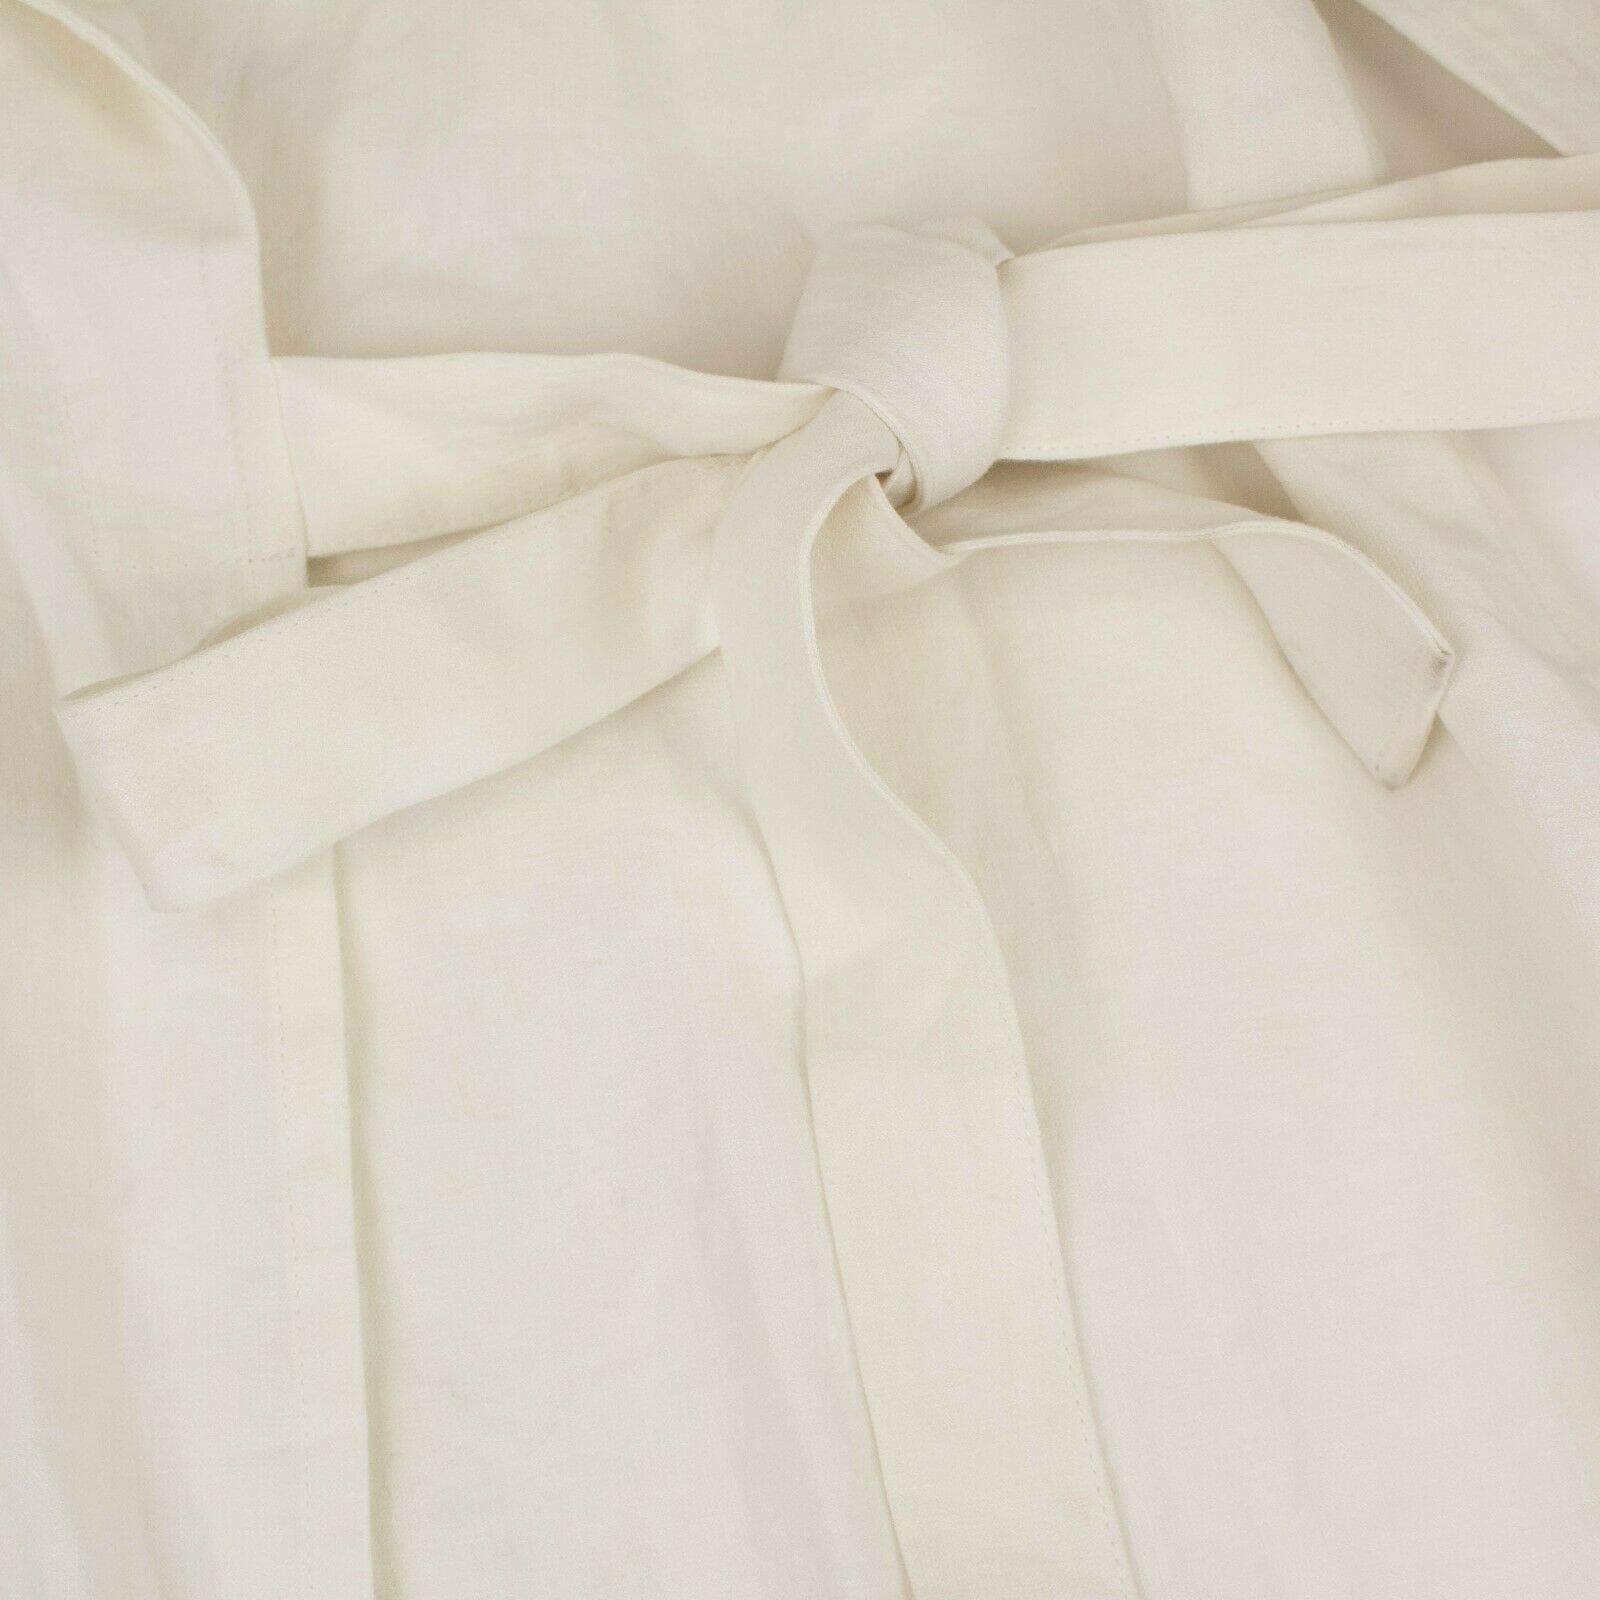 A_Plan_Application 250-500, a_plan_application, channelenable-all, chicmi, couponcollection, gender-womens, july4th, main-clothing, size-s, womens-cocktail-dresses S White Tie Waist Dress 82NGG-AP-9/S 82NGG-AP-9/S